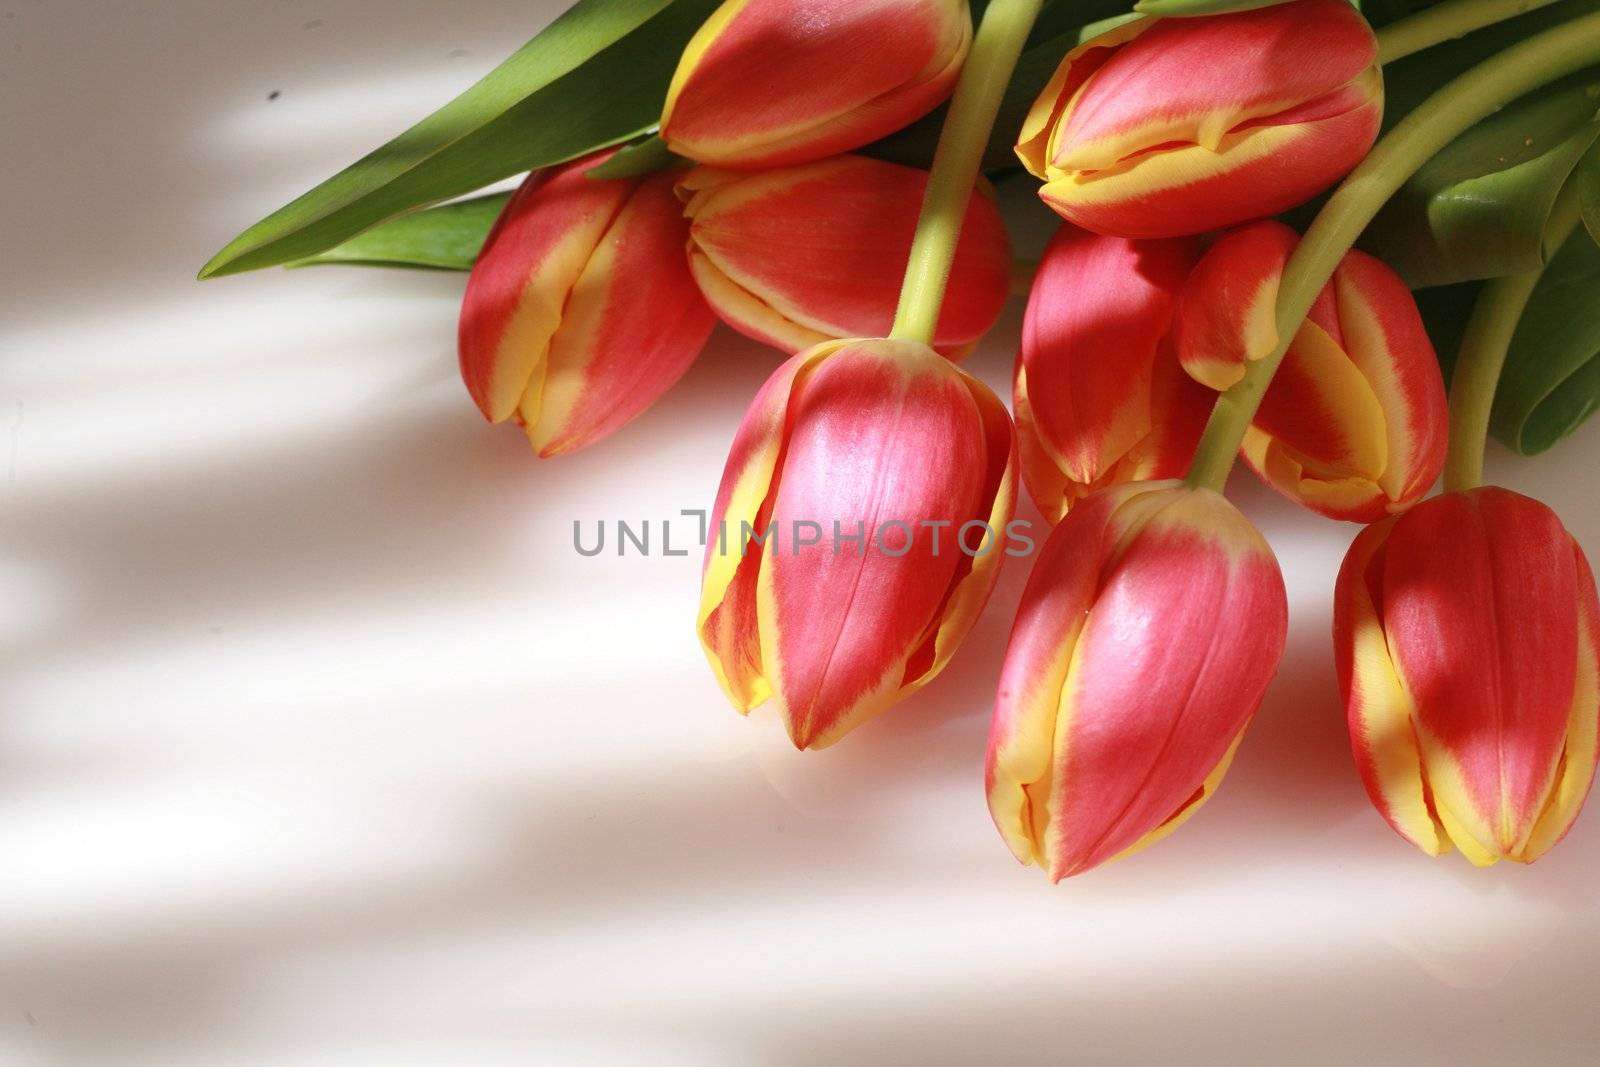 tulips in creative lightning normally not suitable for Microstock